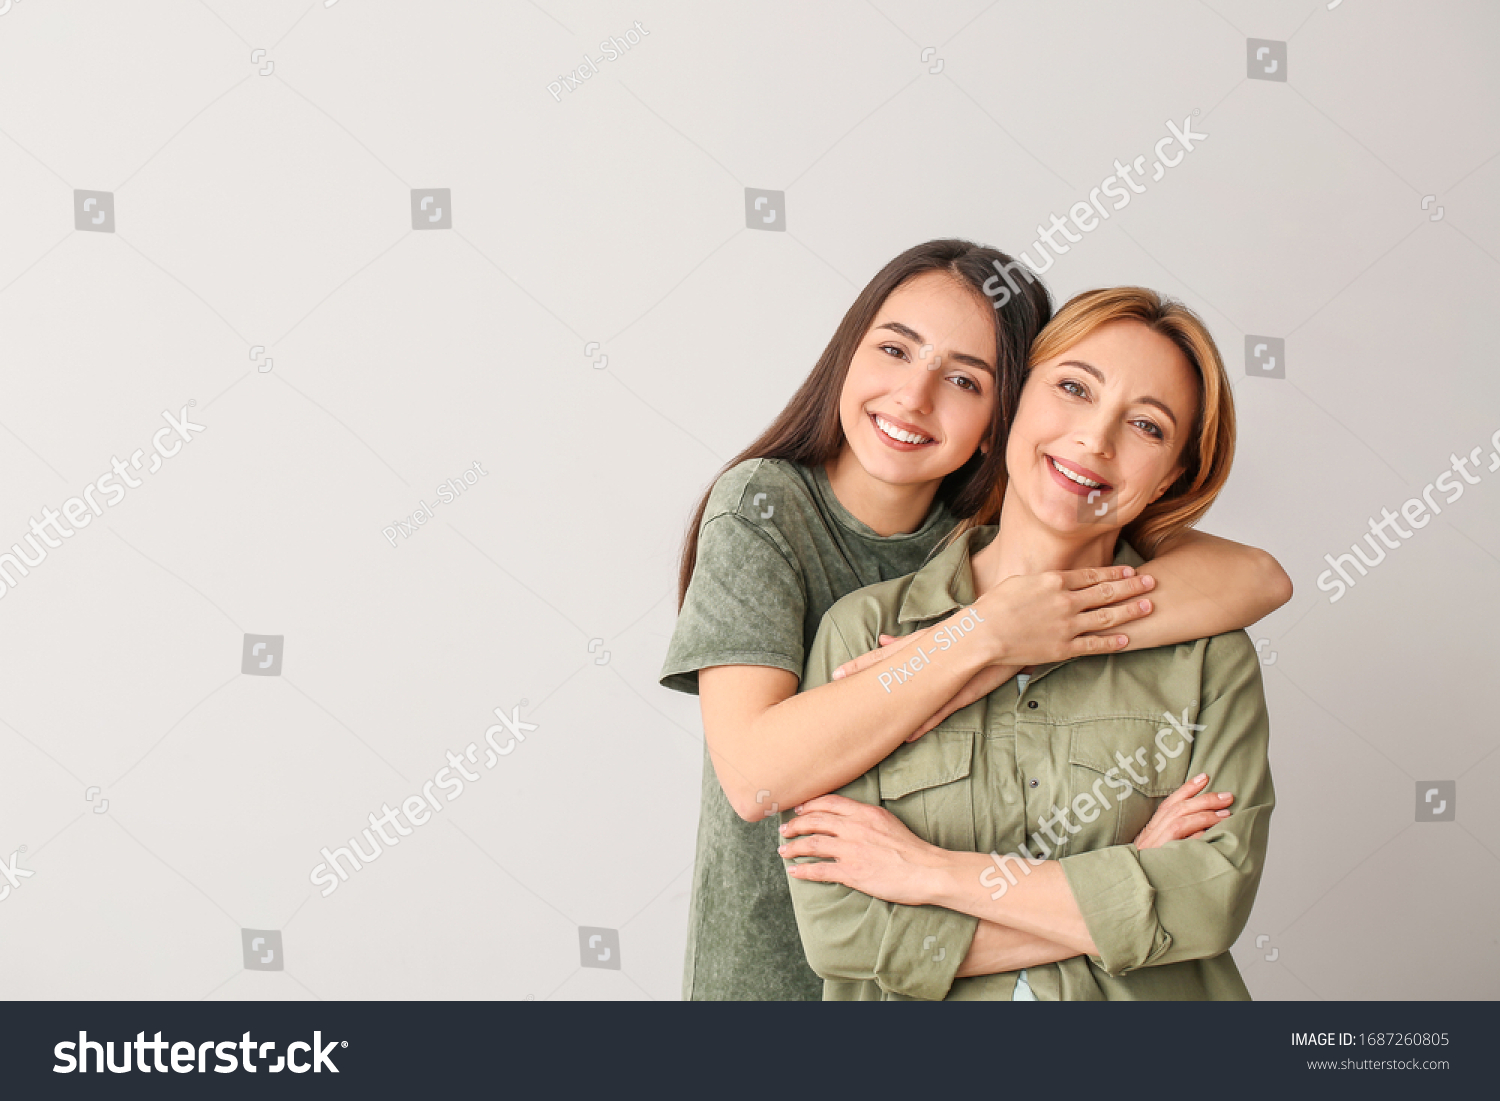 Portrait of young woman and mother on grey background #1687260805